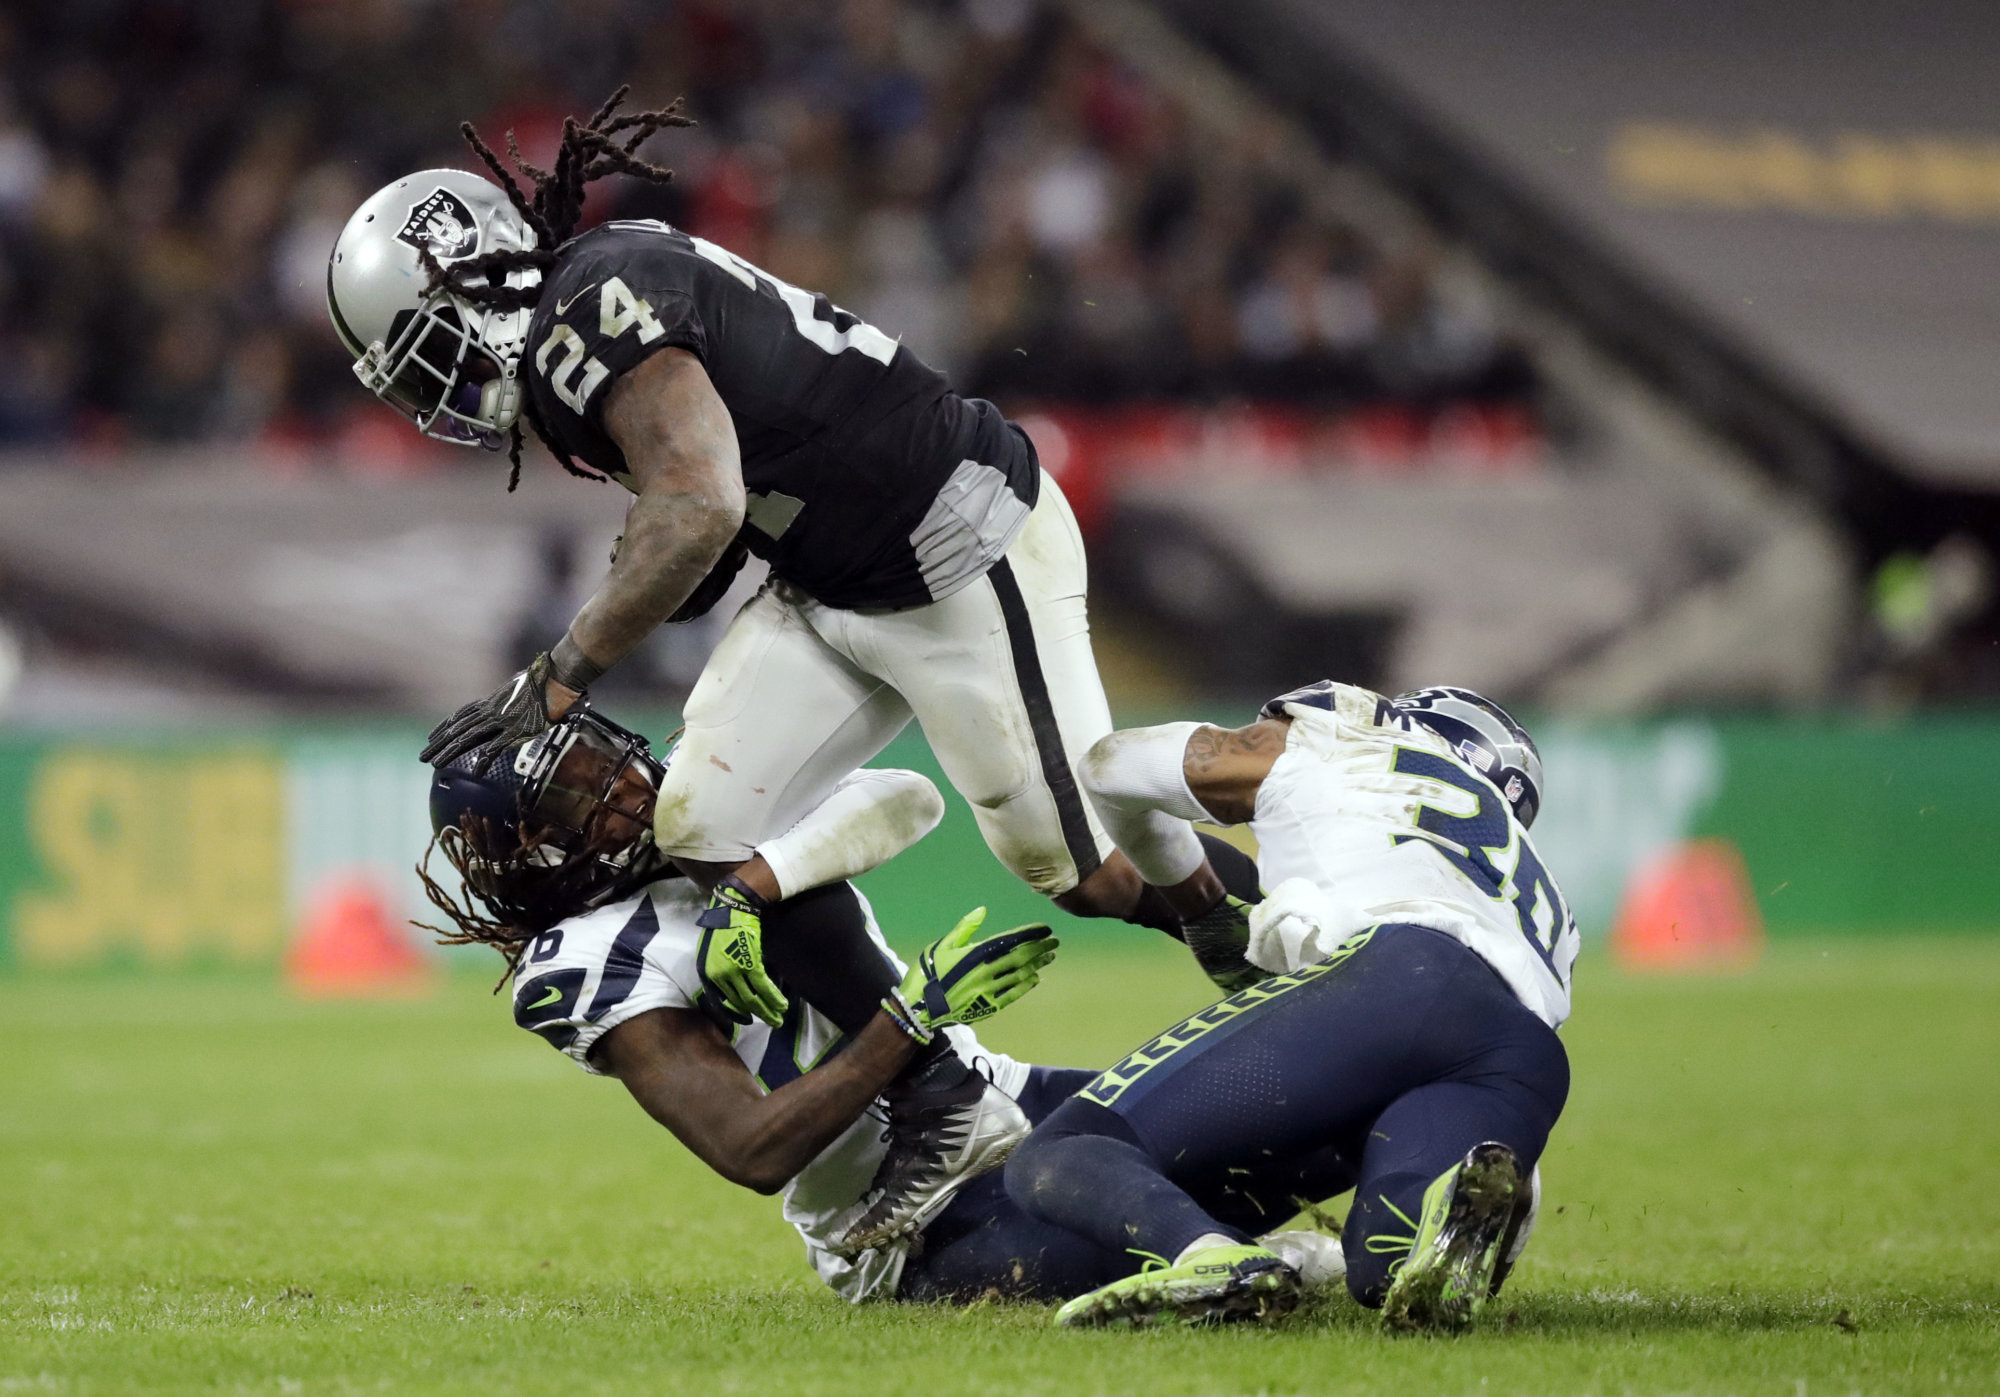 Oakland Raiders running back Marshawn Lynch (24) is tackled by Seattle Seahawks cornerback Shaquill Griffin (26) and strong safety Bradley McDougald (30) during the second half of an NFL football game at Wembley stadium in London, Sunday, Oct. 14, 2018. (AP Photo/Matt Dunham)